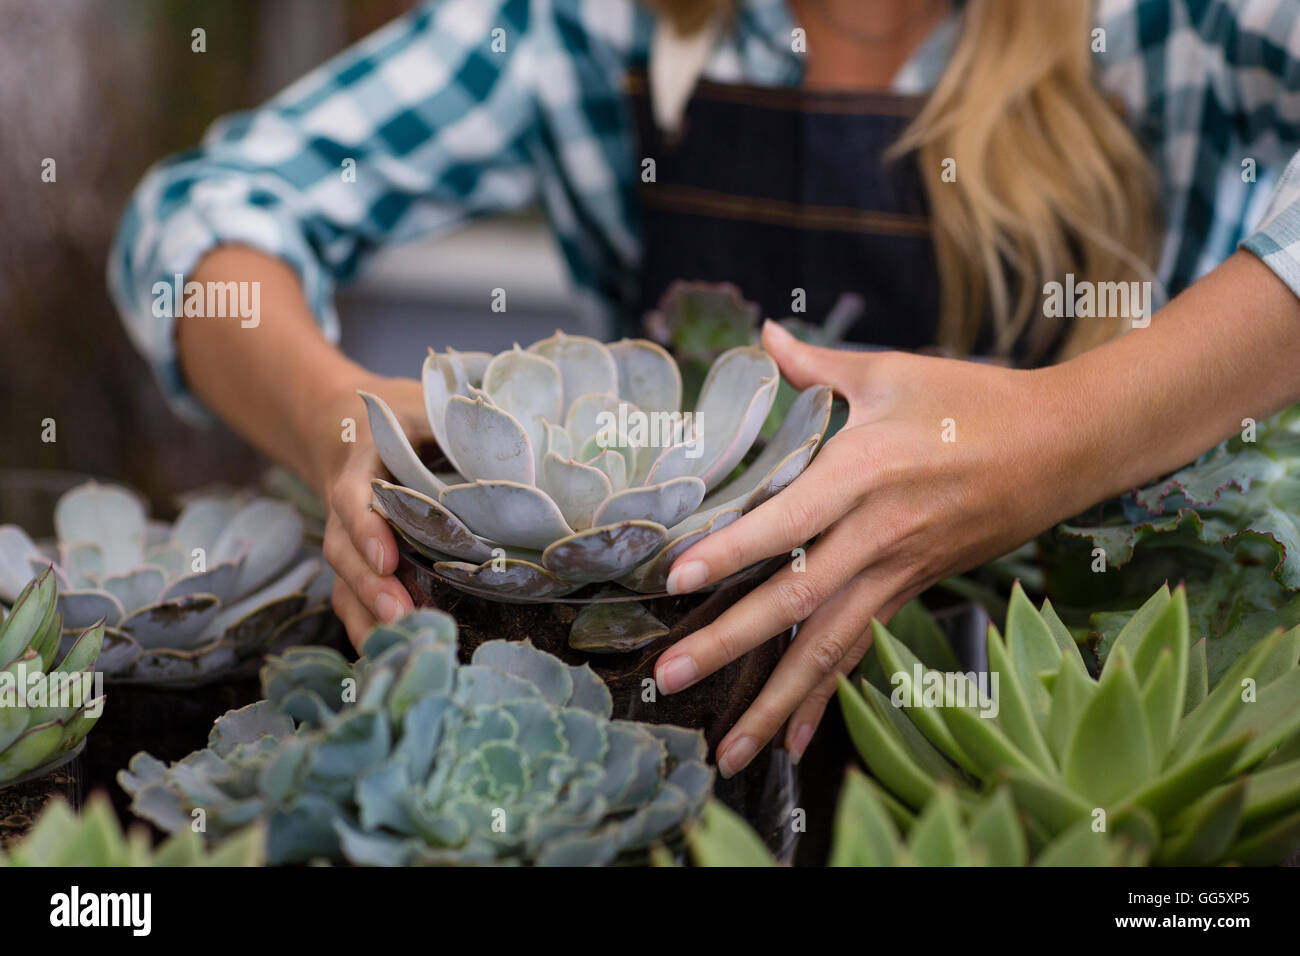 Close-up of a woman arranging plants Stock Photo